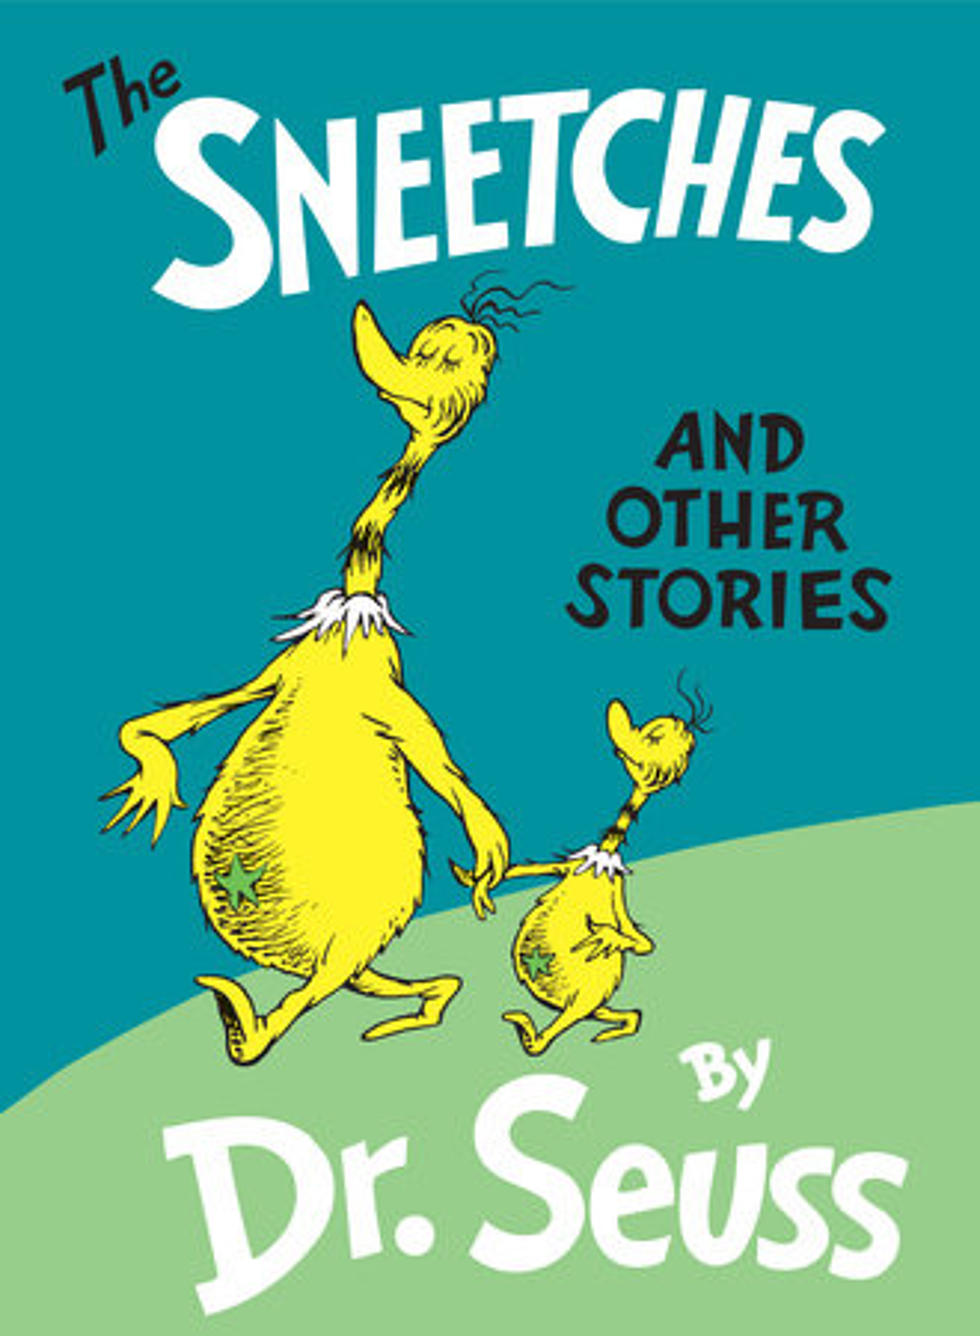 Psychic Seuss: Did New England Native Predict This News Story?